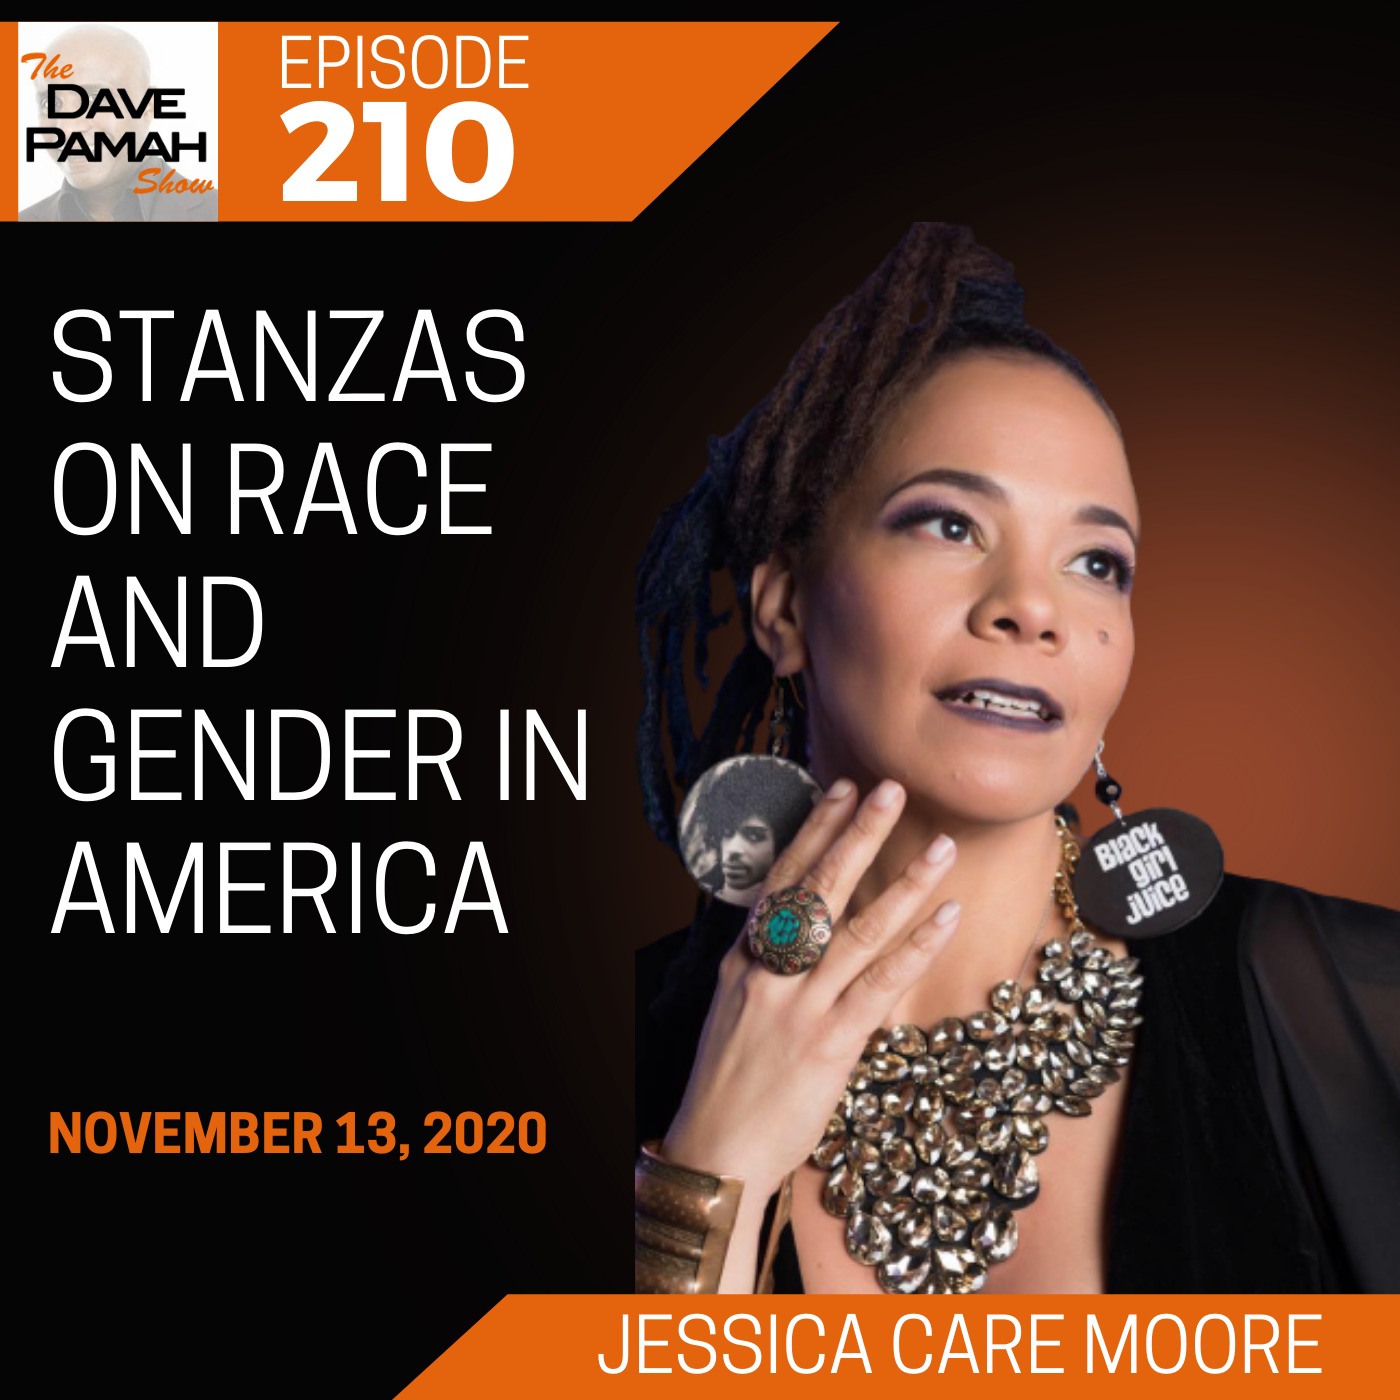 Stanzas on race and gender in America with Jessica Care Moore